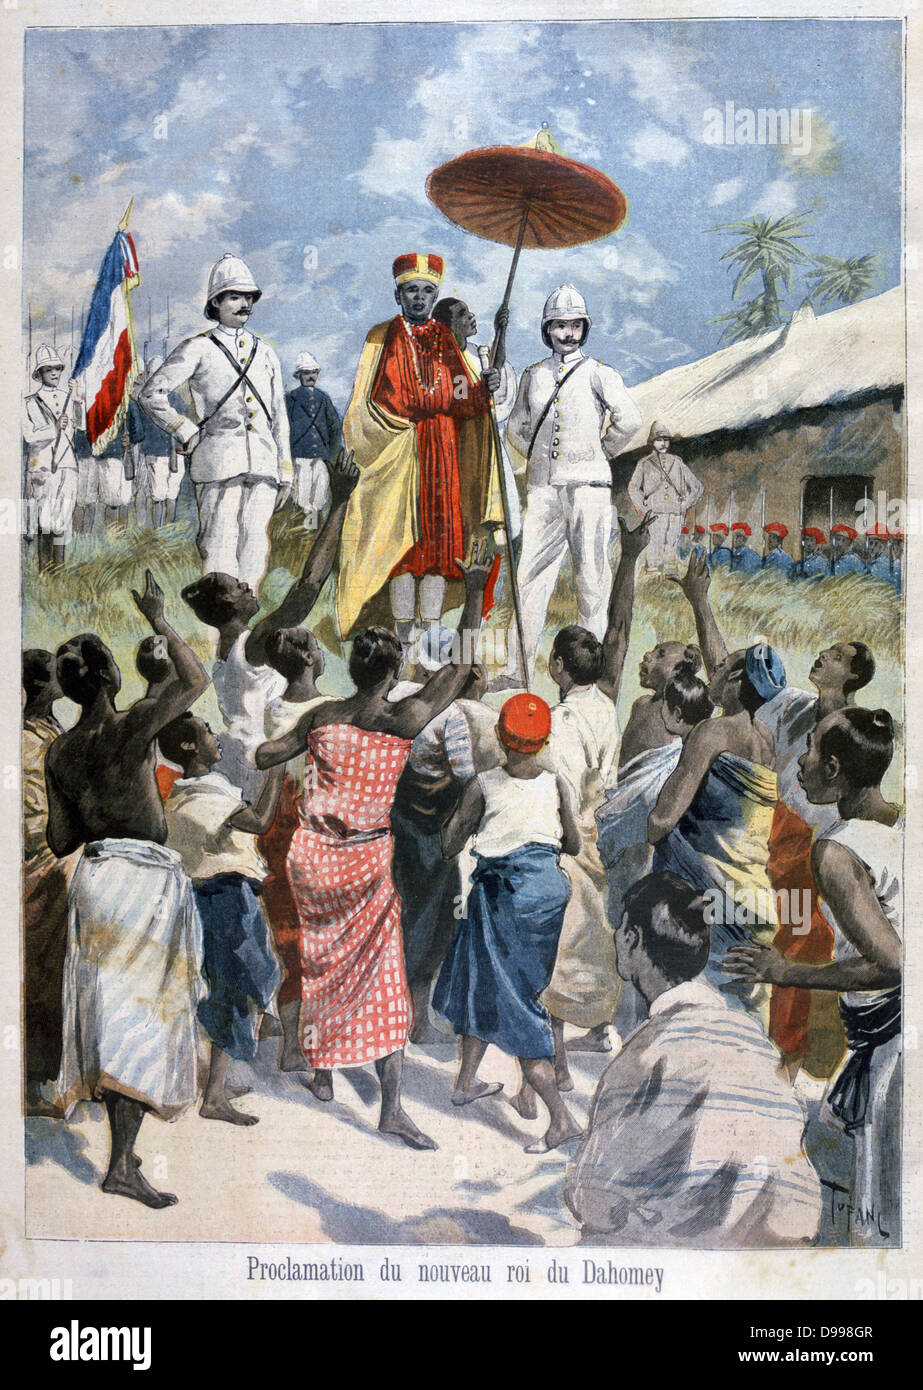 Proclamation of the new King of Dahomey, Agloliagbo (formerly Gouthili).  Dahomey, now Republic of Benin, was a French protectorate.  From 'Le Petit Journal', Paris, 19 February 1894. France, Colonialism, Africa Stock Photo